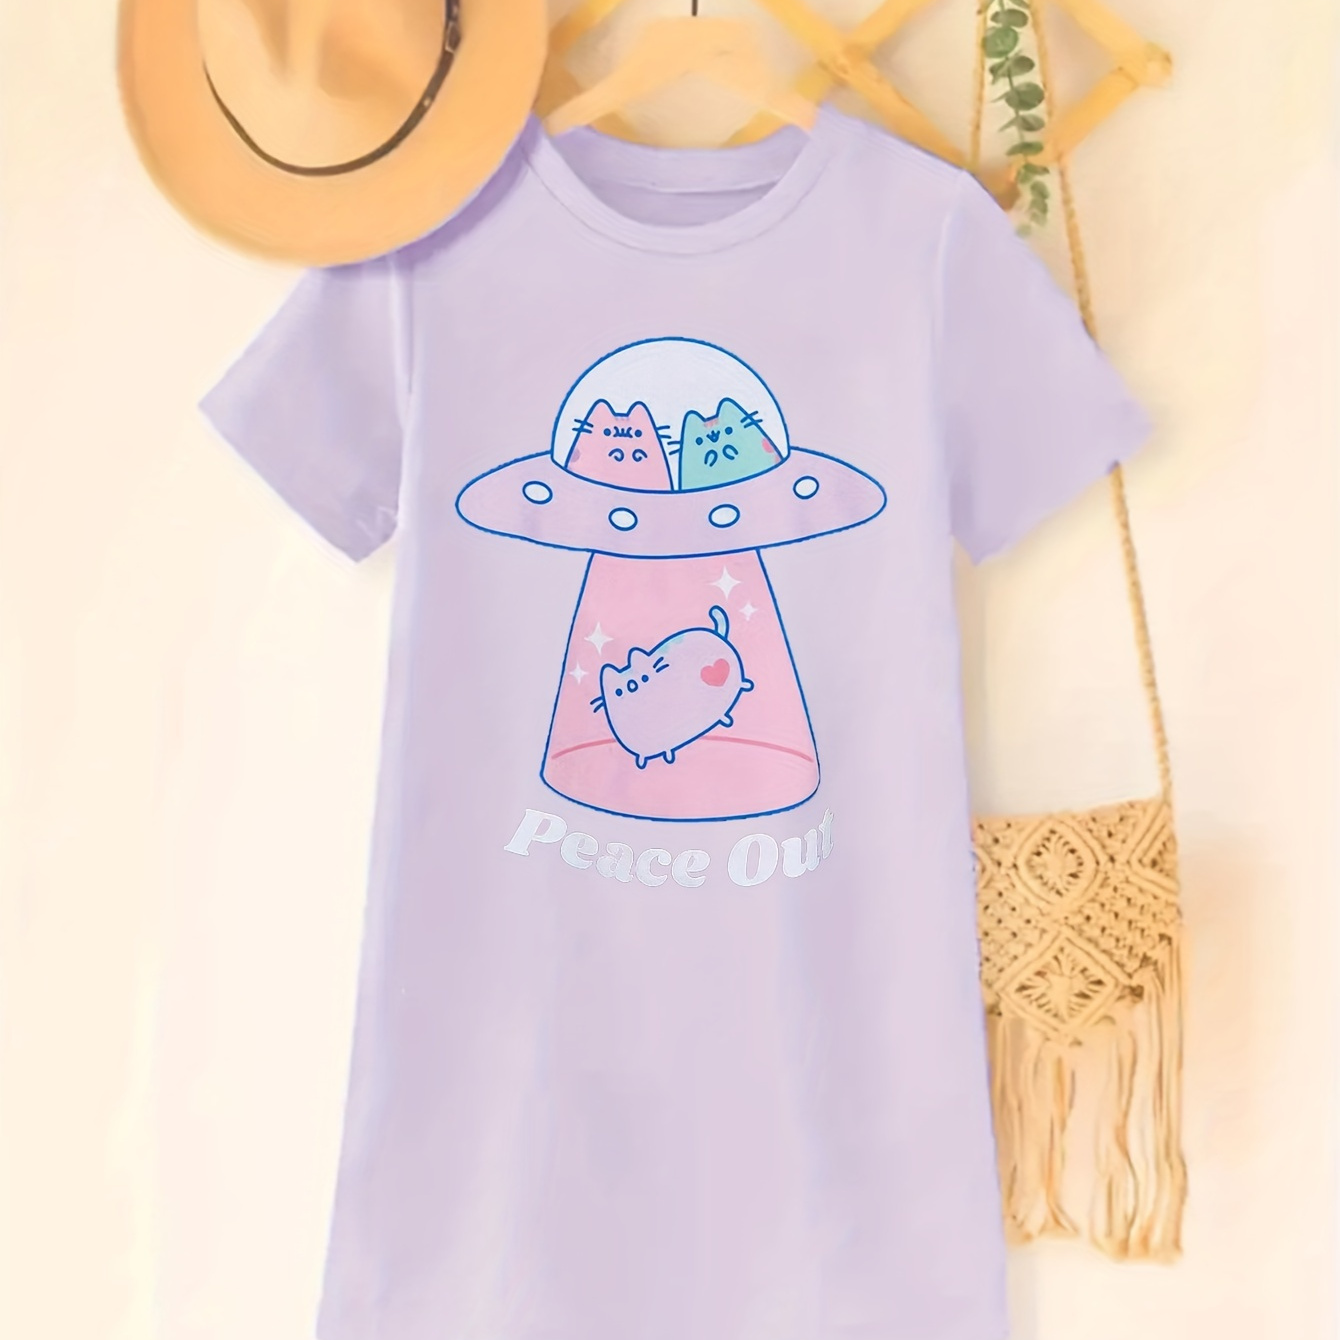 

Girls' Casual T-shirt Dress, Cute Ufo & Cat & "peace Out" Design, Round Neck Fashion Comfort Spring Summer Tee Dress, Adorable Girl's Clothing Gift